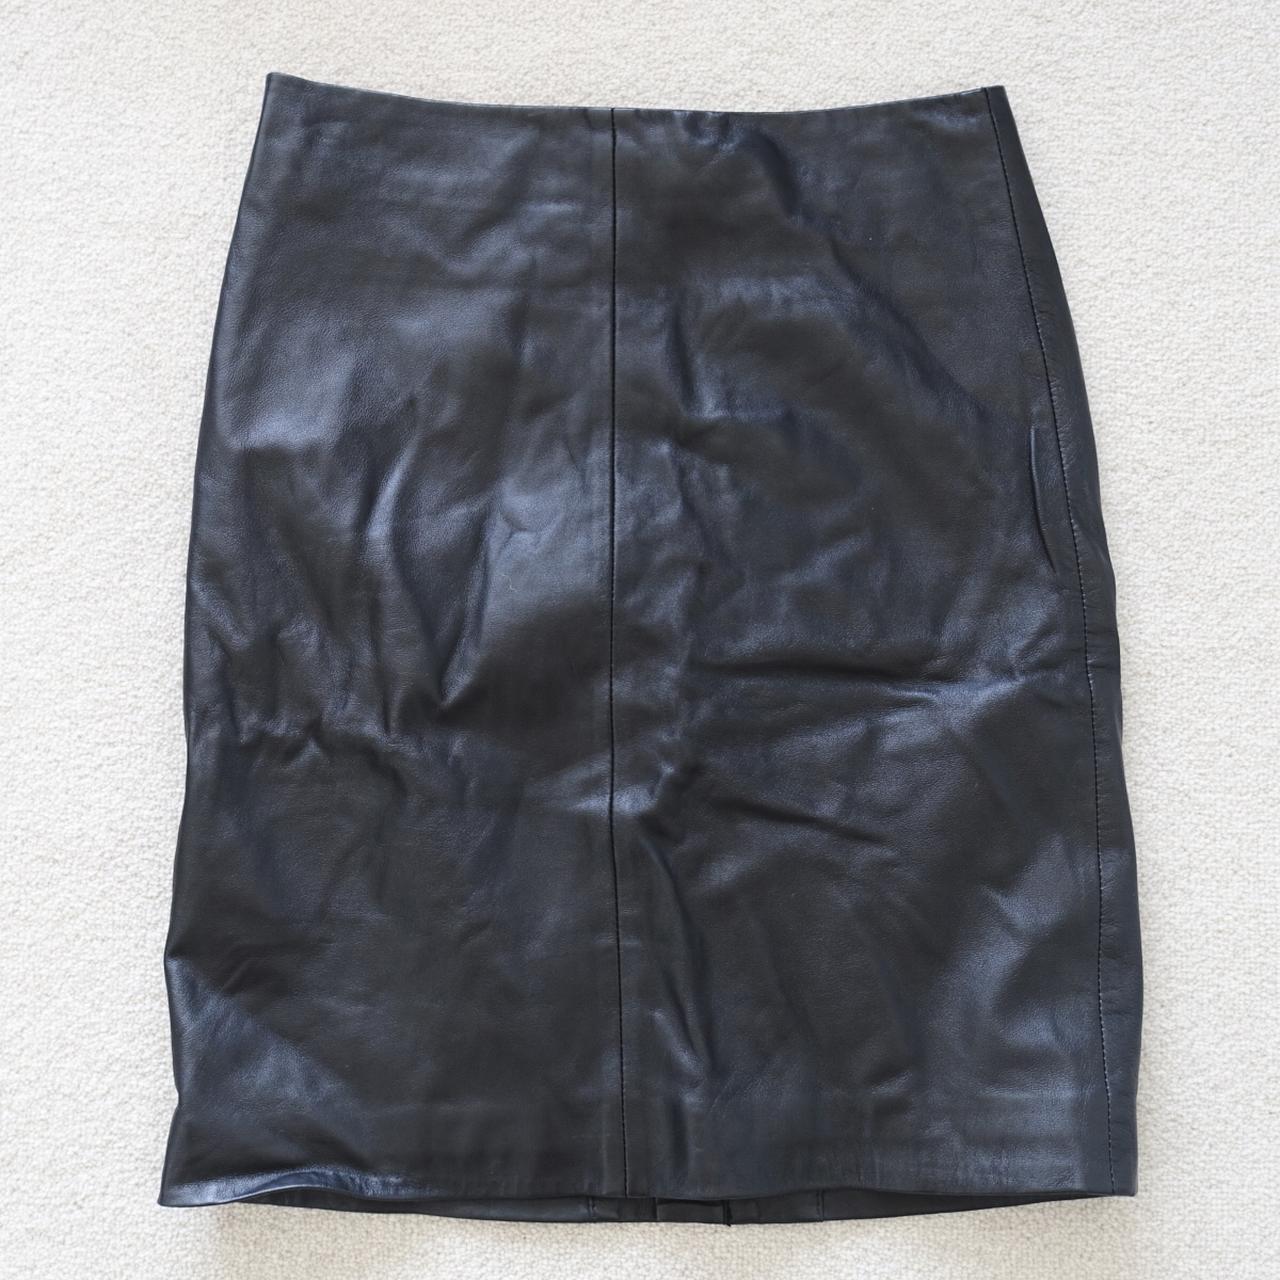 All Saints genuine leather skirt with zip detail on... - Depop